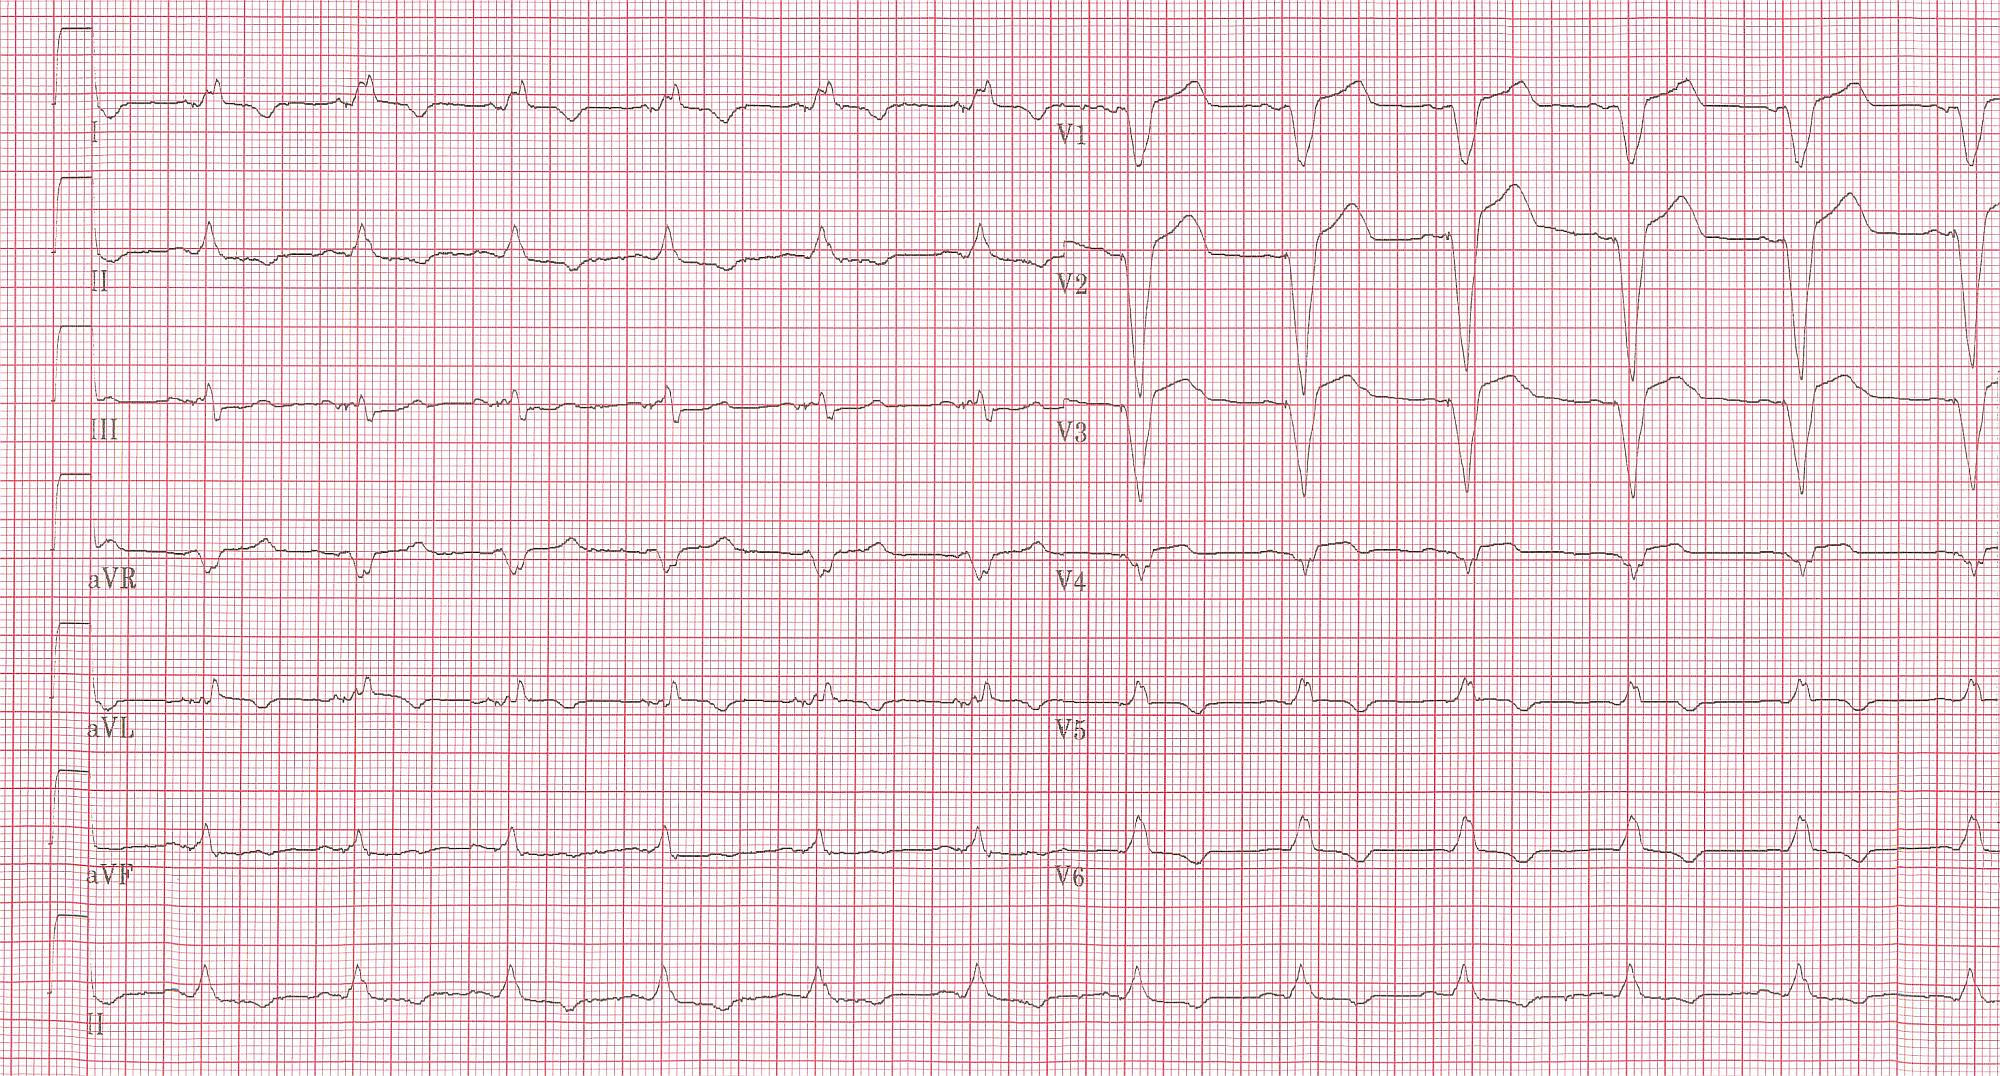 The same patient as in the first example 2 months before the myocardial infarction. Normal LBBB pattern.